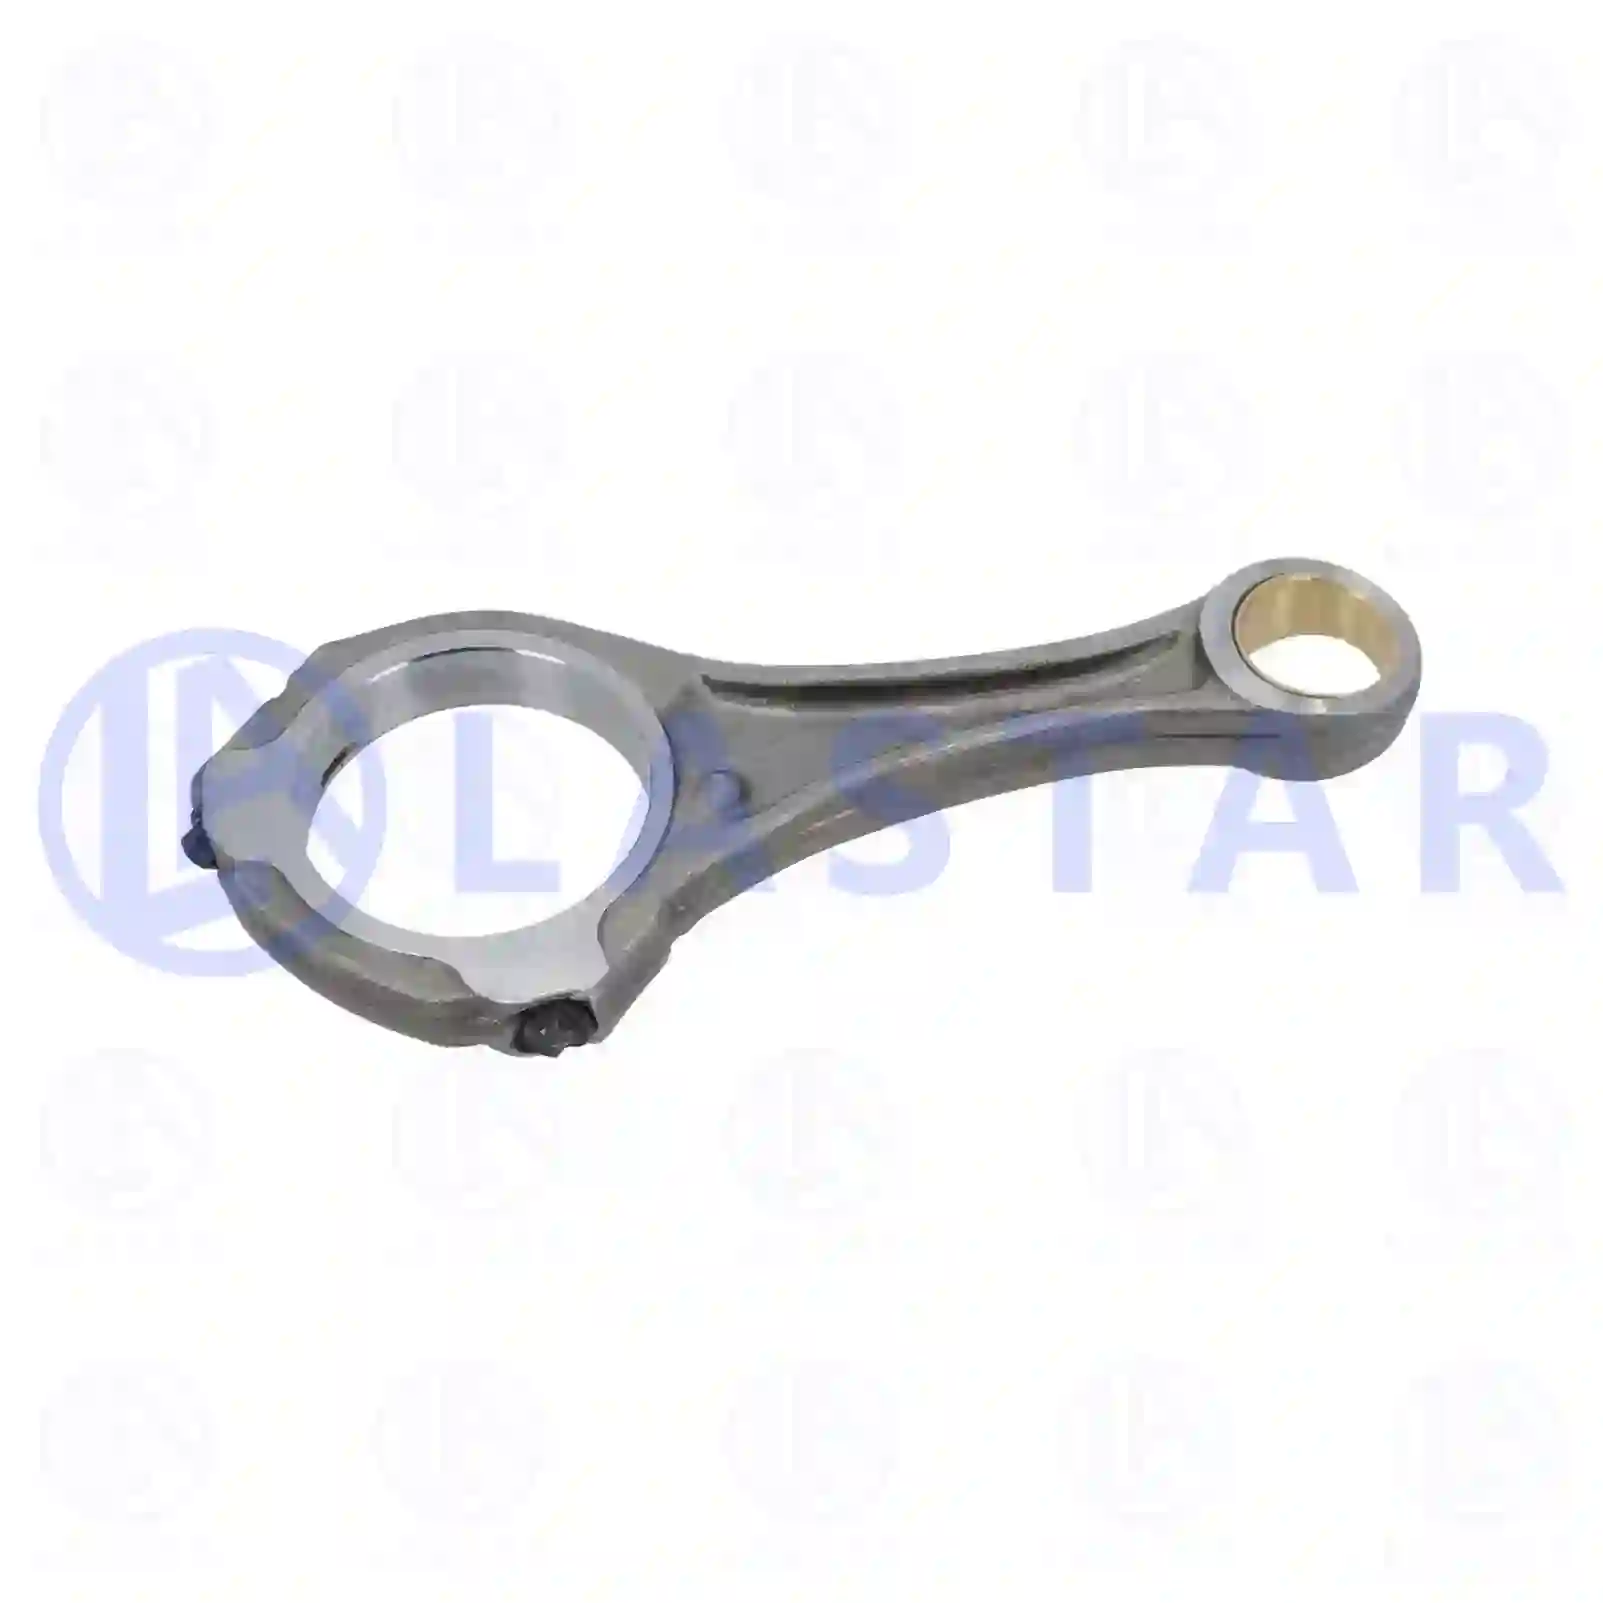 Connecting rod, 77702206, 6420304020, 6420304120, 6420305220 ||  77702206 Lastar Spare Part | Truck Spare Parts, Auotomotive Spare Parts Connecting rod, 77702206, 6420304020, 6420304120, 6420305220 ||  77702206 Lastar Spare Part | Truck Spare Parts, Auotomotive Spare Parts